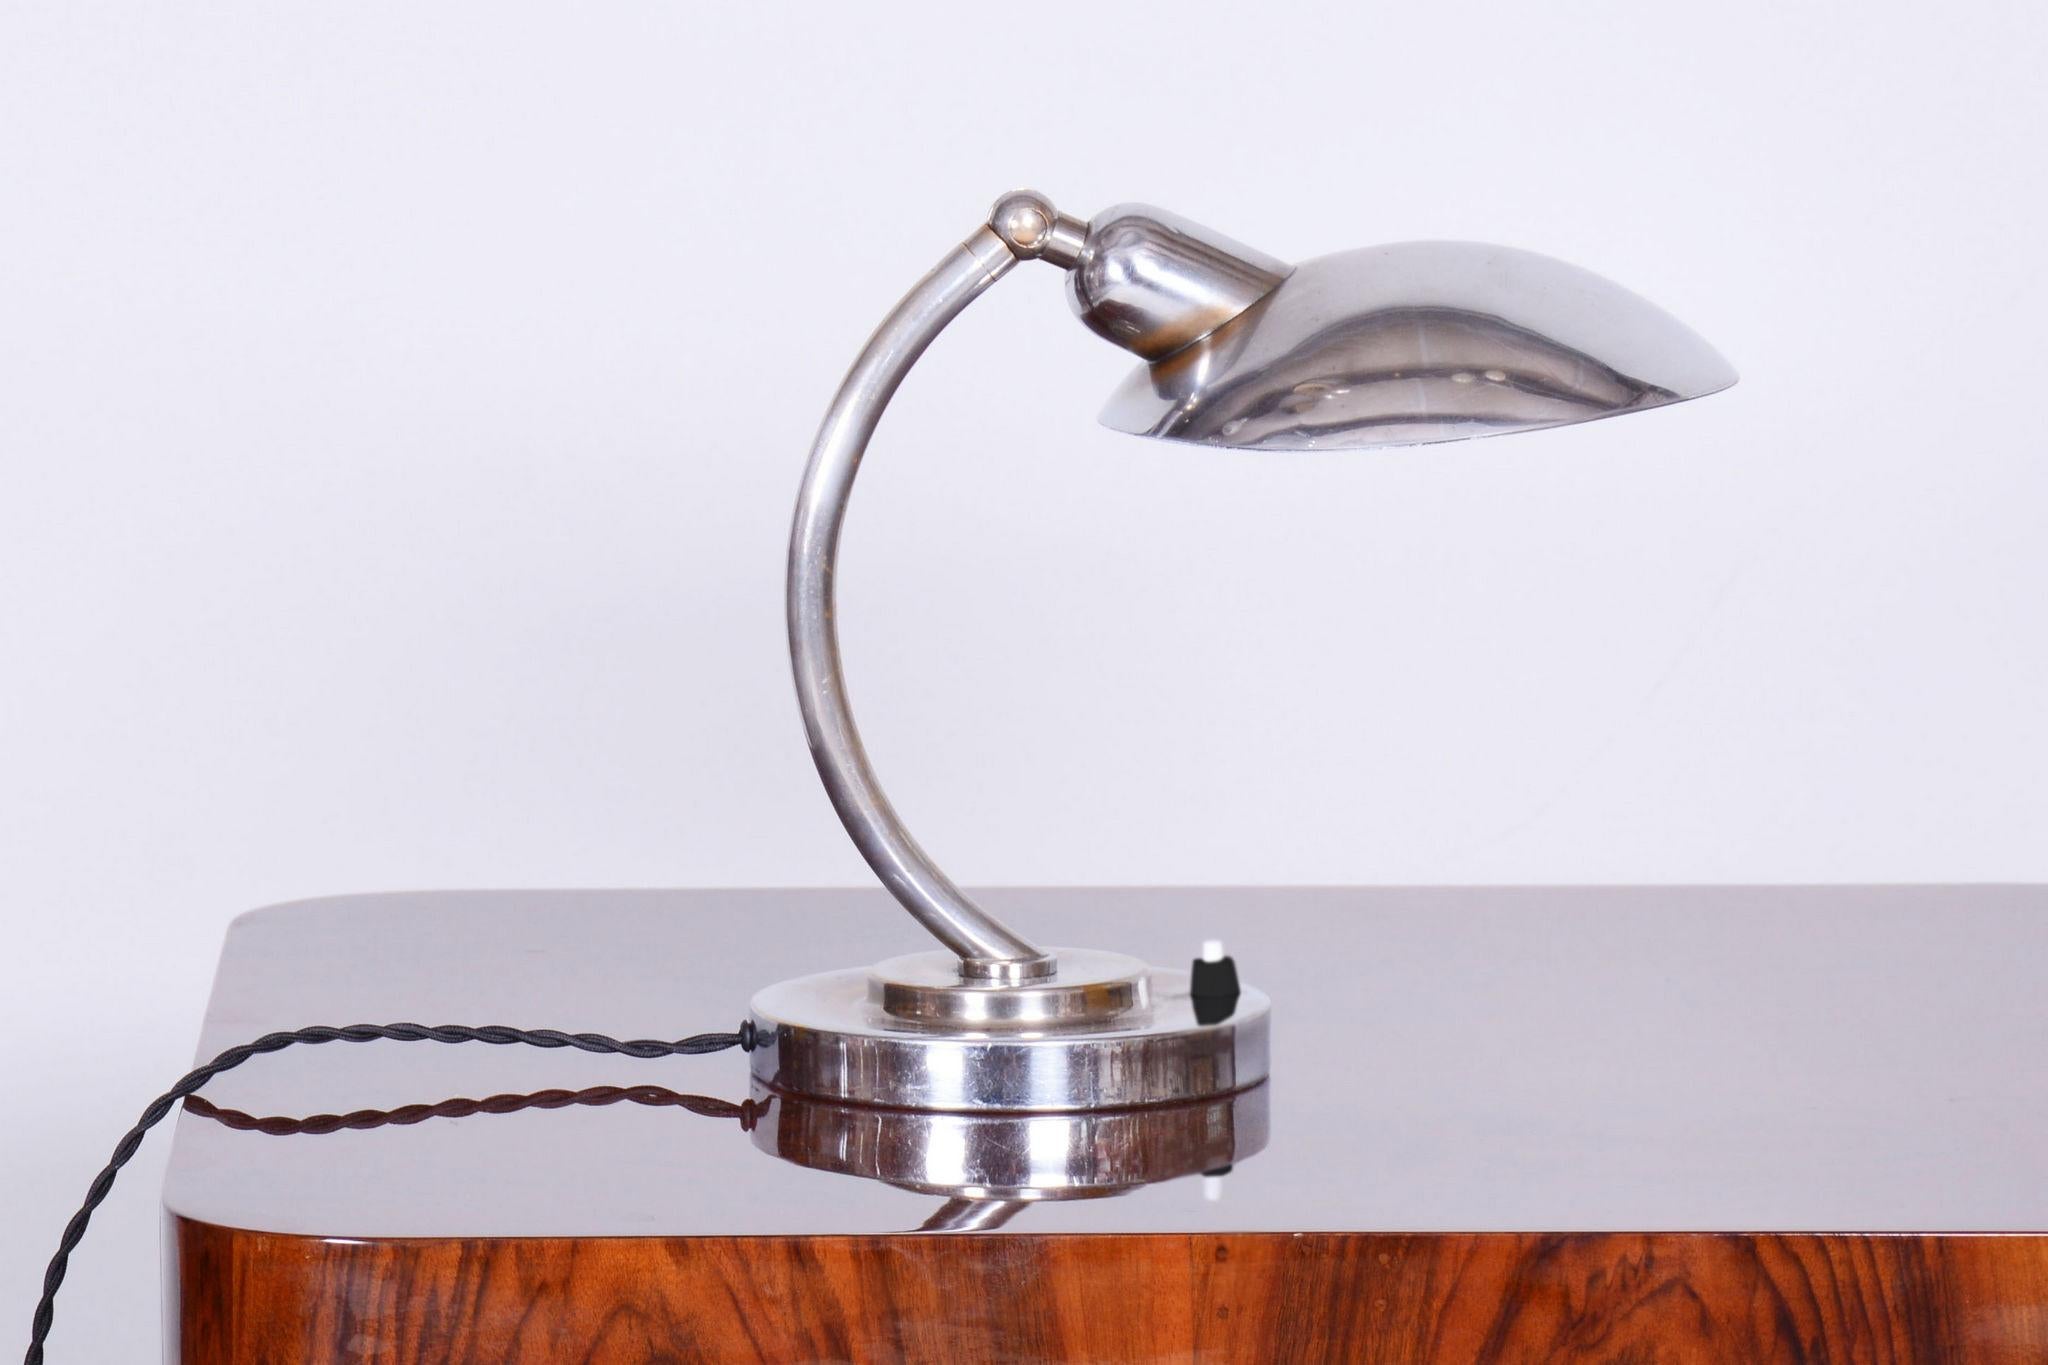 Restored Bauhaus Chrome Table Lamp, F. Anyz, New Electrification, Czechia, 1920s For Sale 7